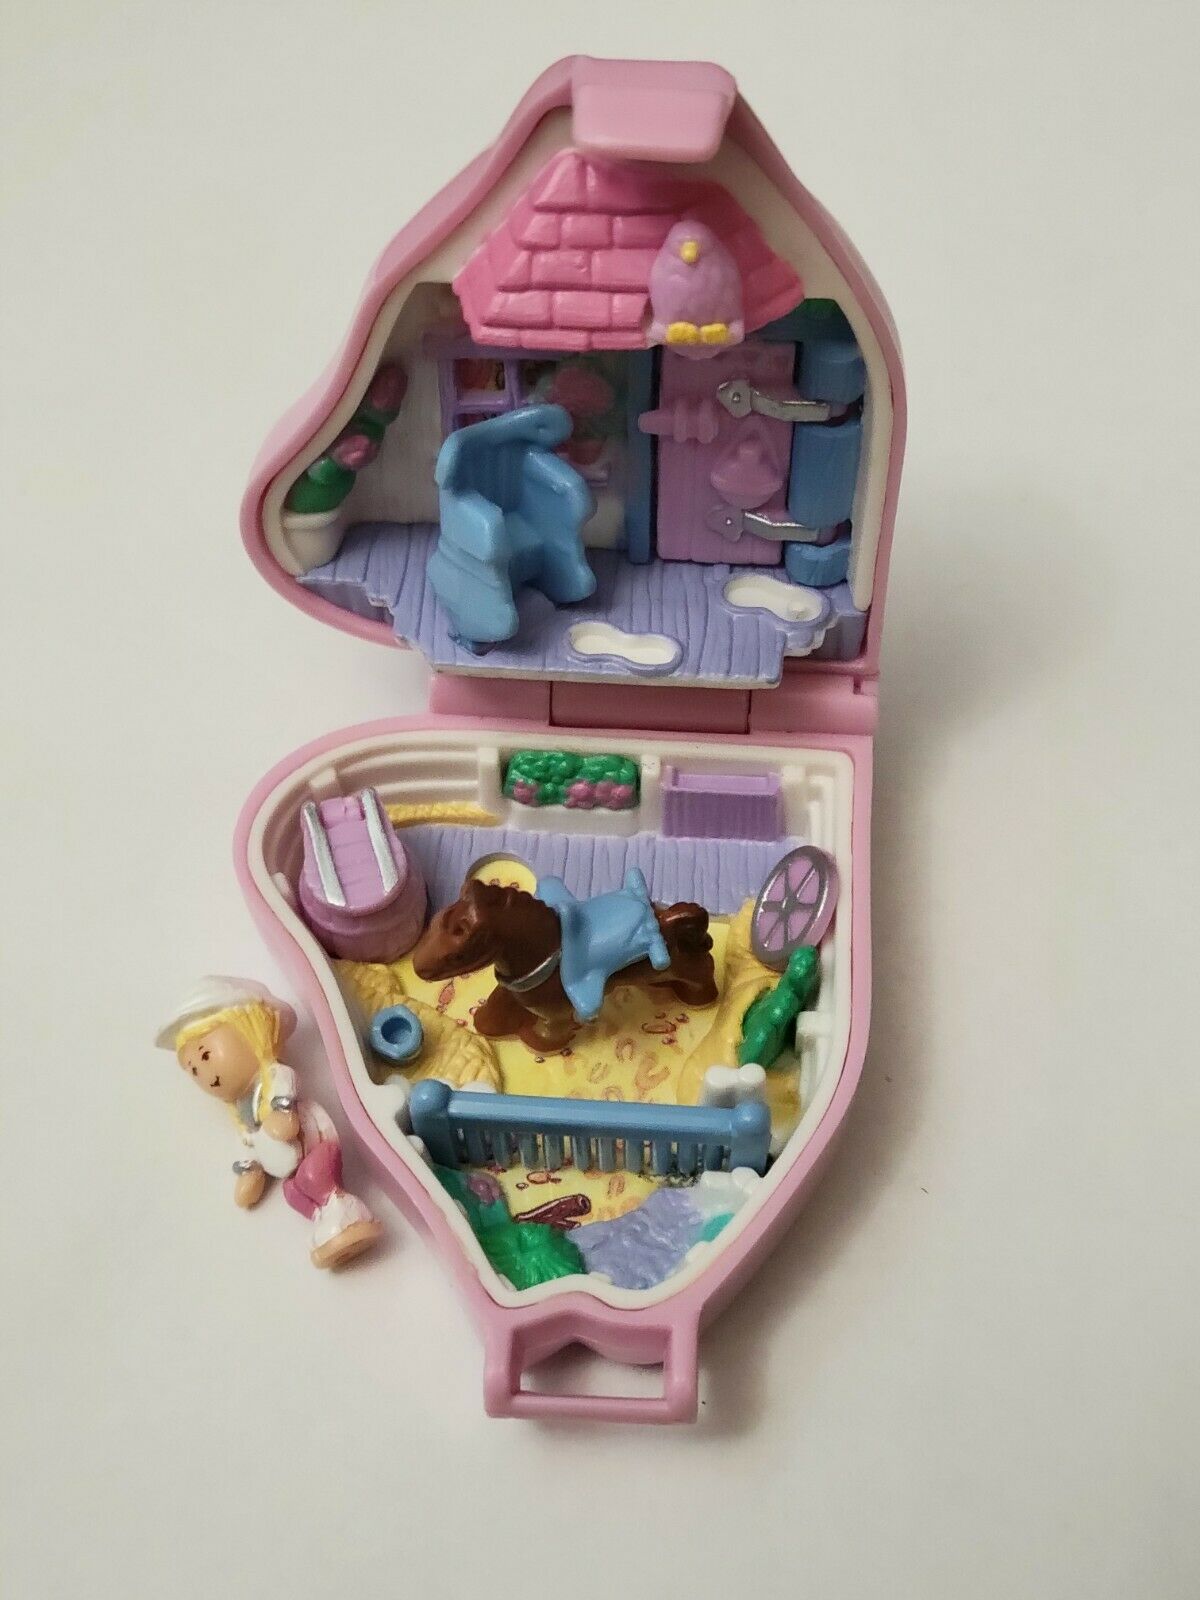 1995 Vintage Bluebird Polly Pocket Western Pony Pink Includes Doll Figure Horse